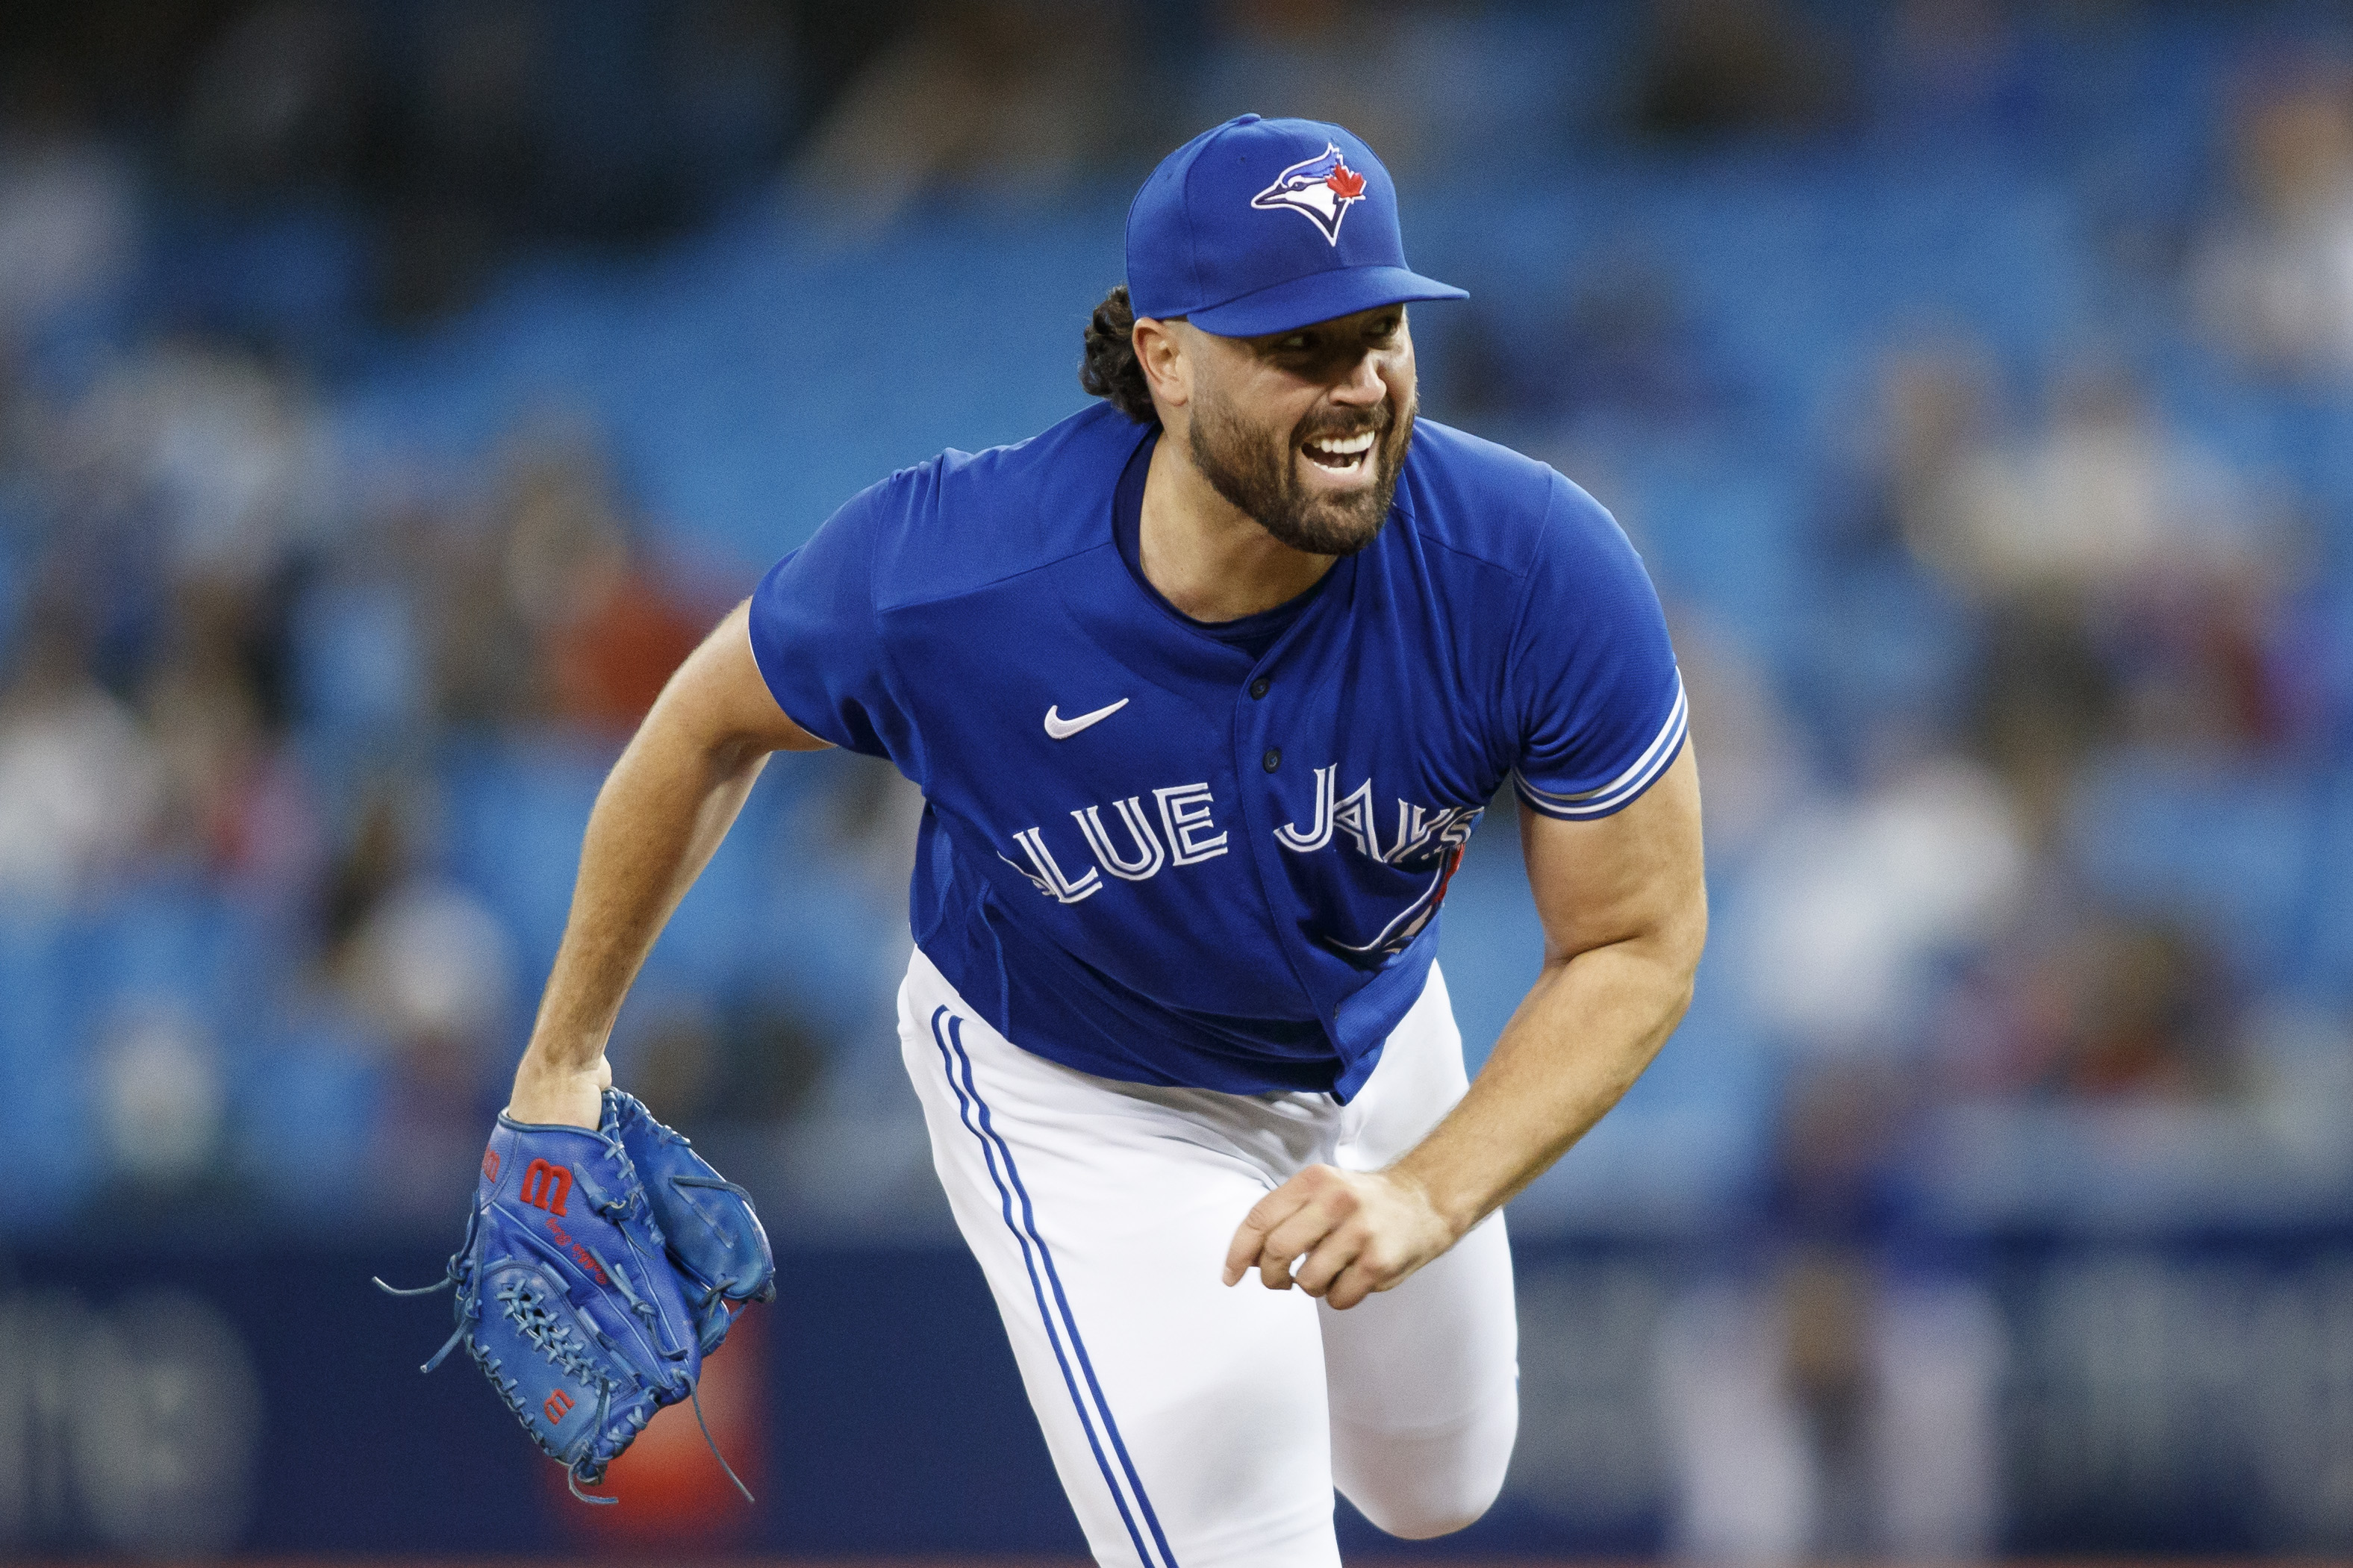 Robbie Ray #38 of the Toronto Blue Jays pitches in the first inning of their MLB game against the New York Yankees at Rogers Centre on September 30, 2021 in Toronto, Ontario.